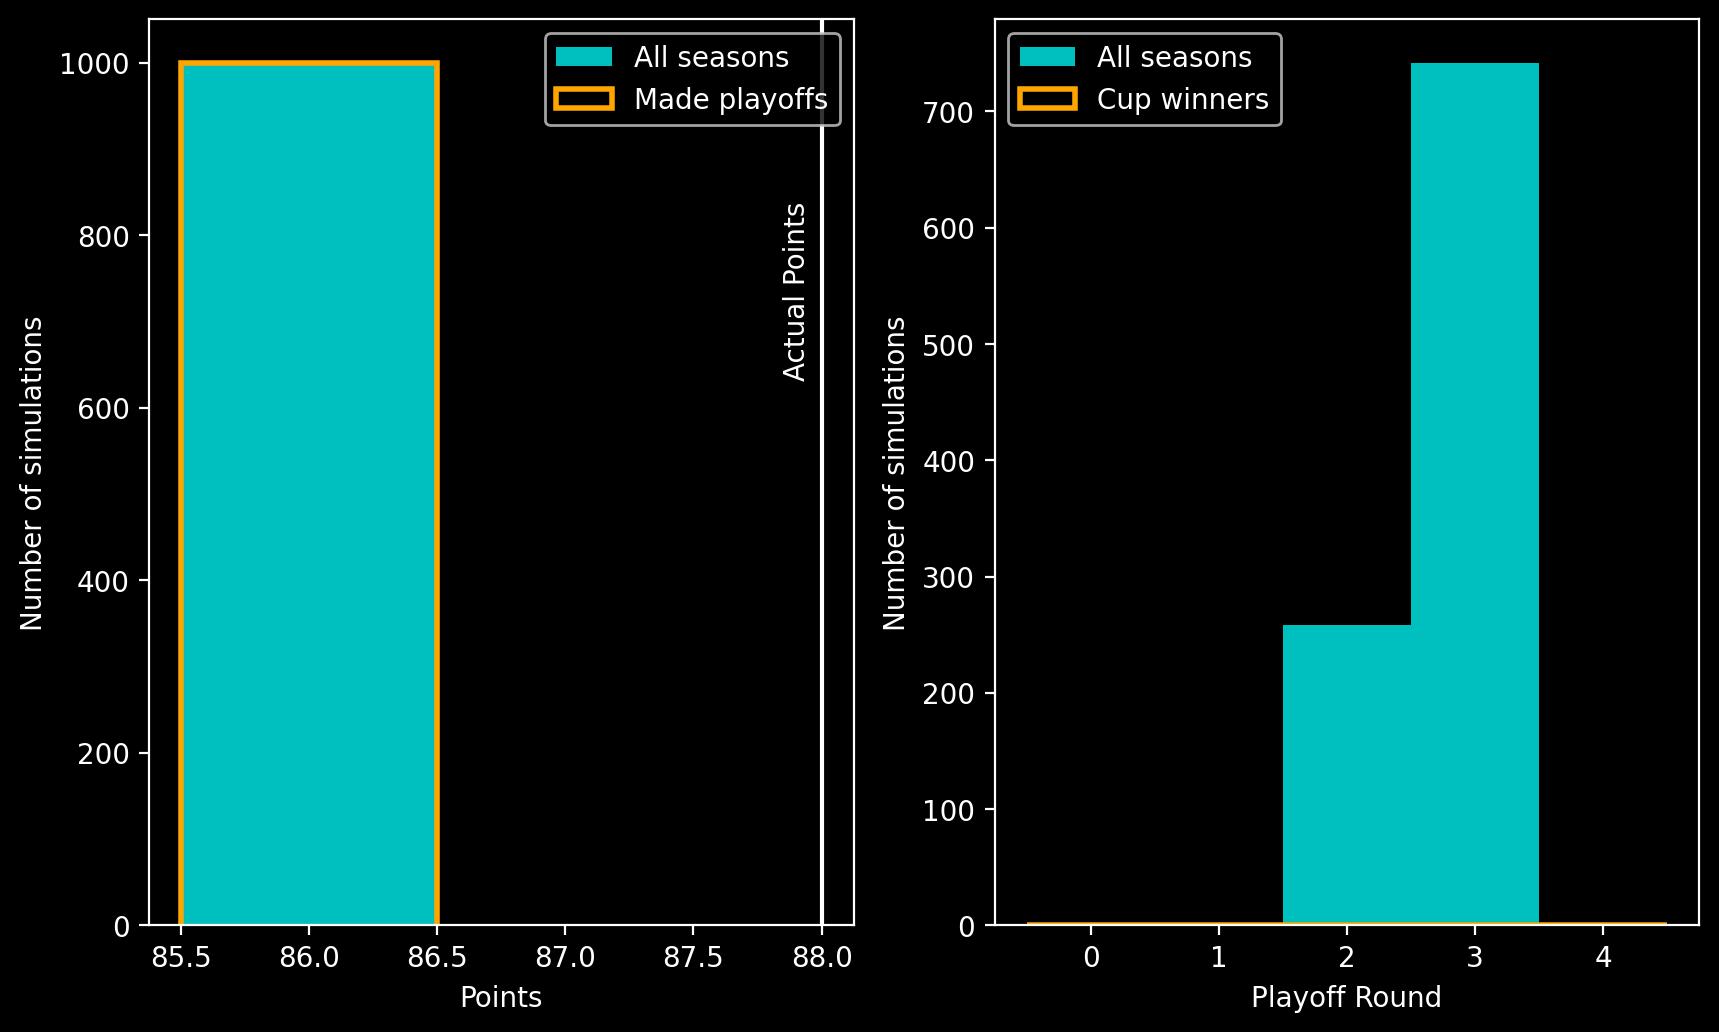 Two panel plot showing histograms. Left panel shows a histogram of points on the x-axis against number of simulations on the y-axis, the peak is at 86 points. Right panel shows playoff round on the x-axis against number of simulations on the y-axis. The largest bar is at playoff round 3.